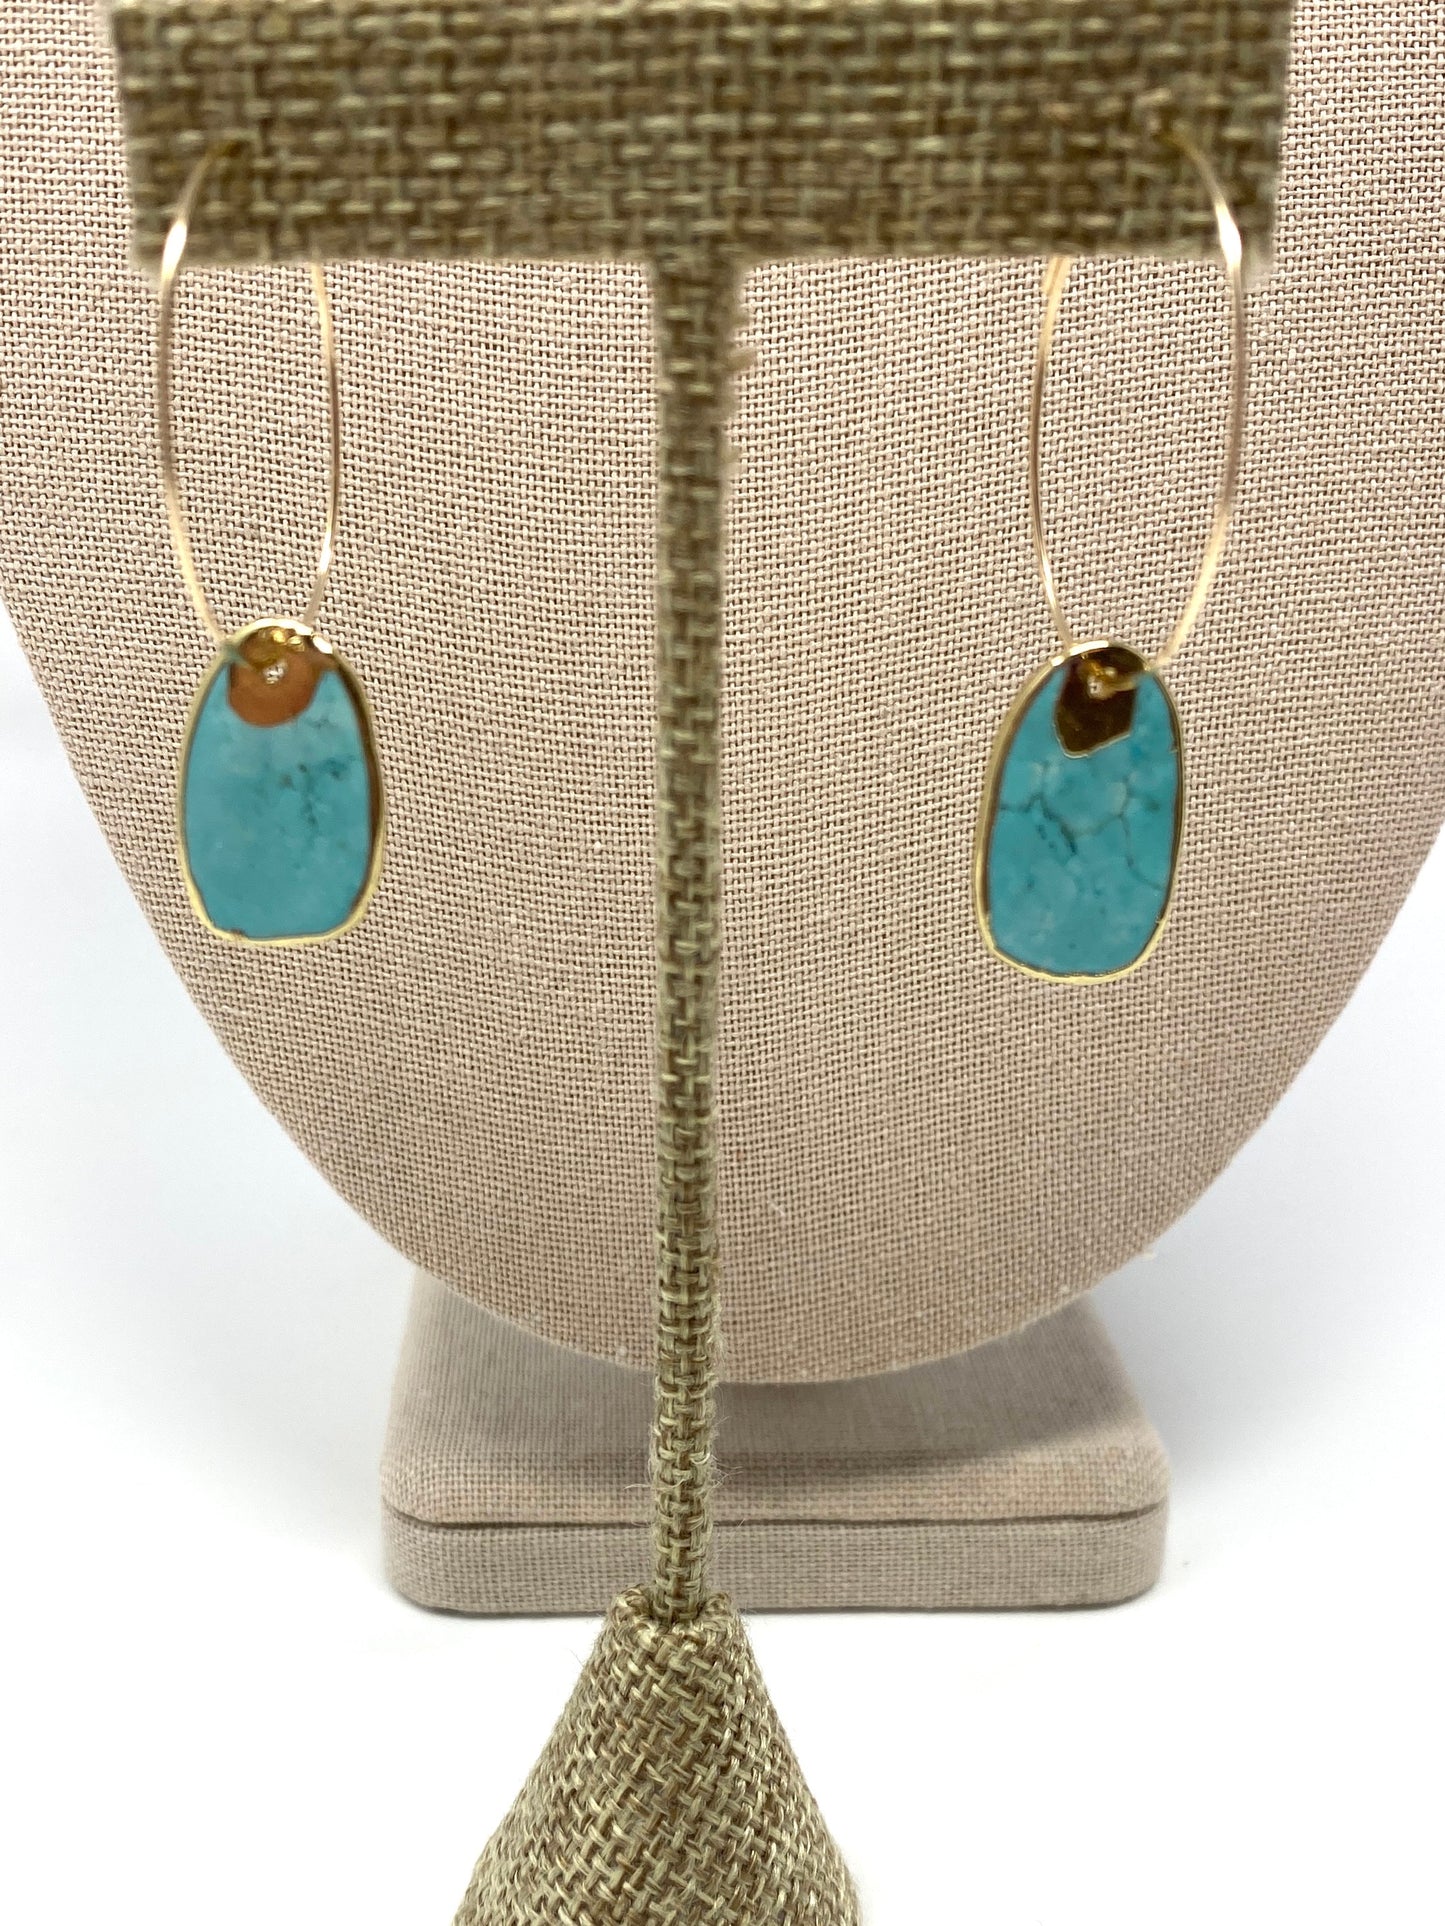 Thin Turquoise Slice Earrings on Gold Filled Wire Hoop